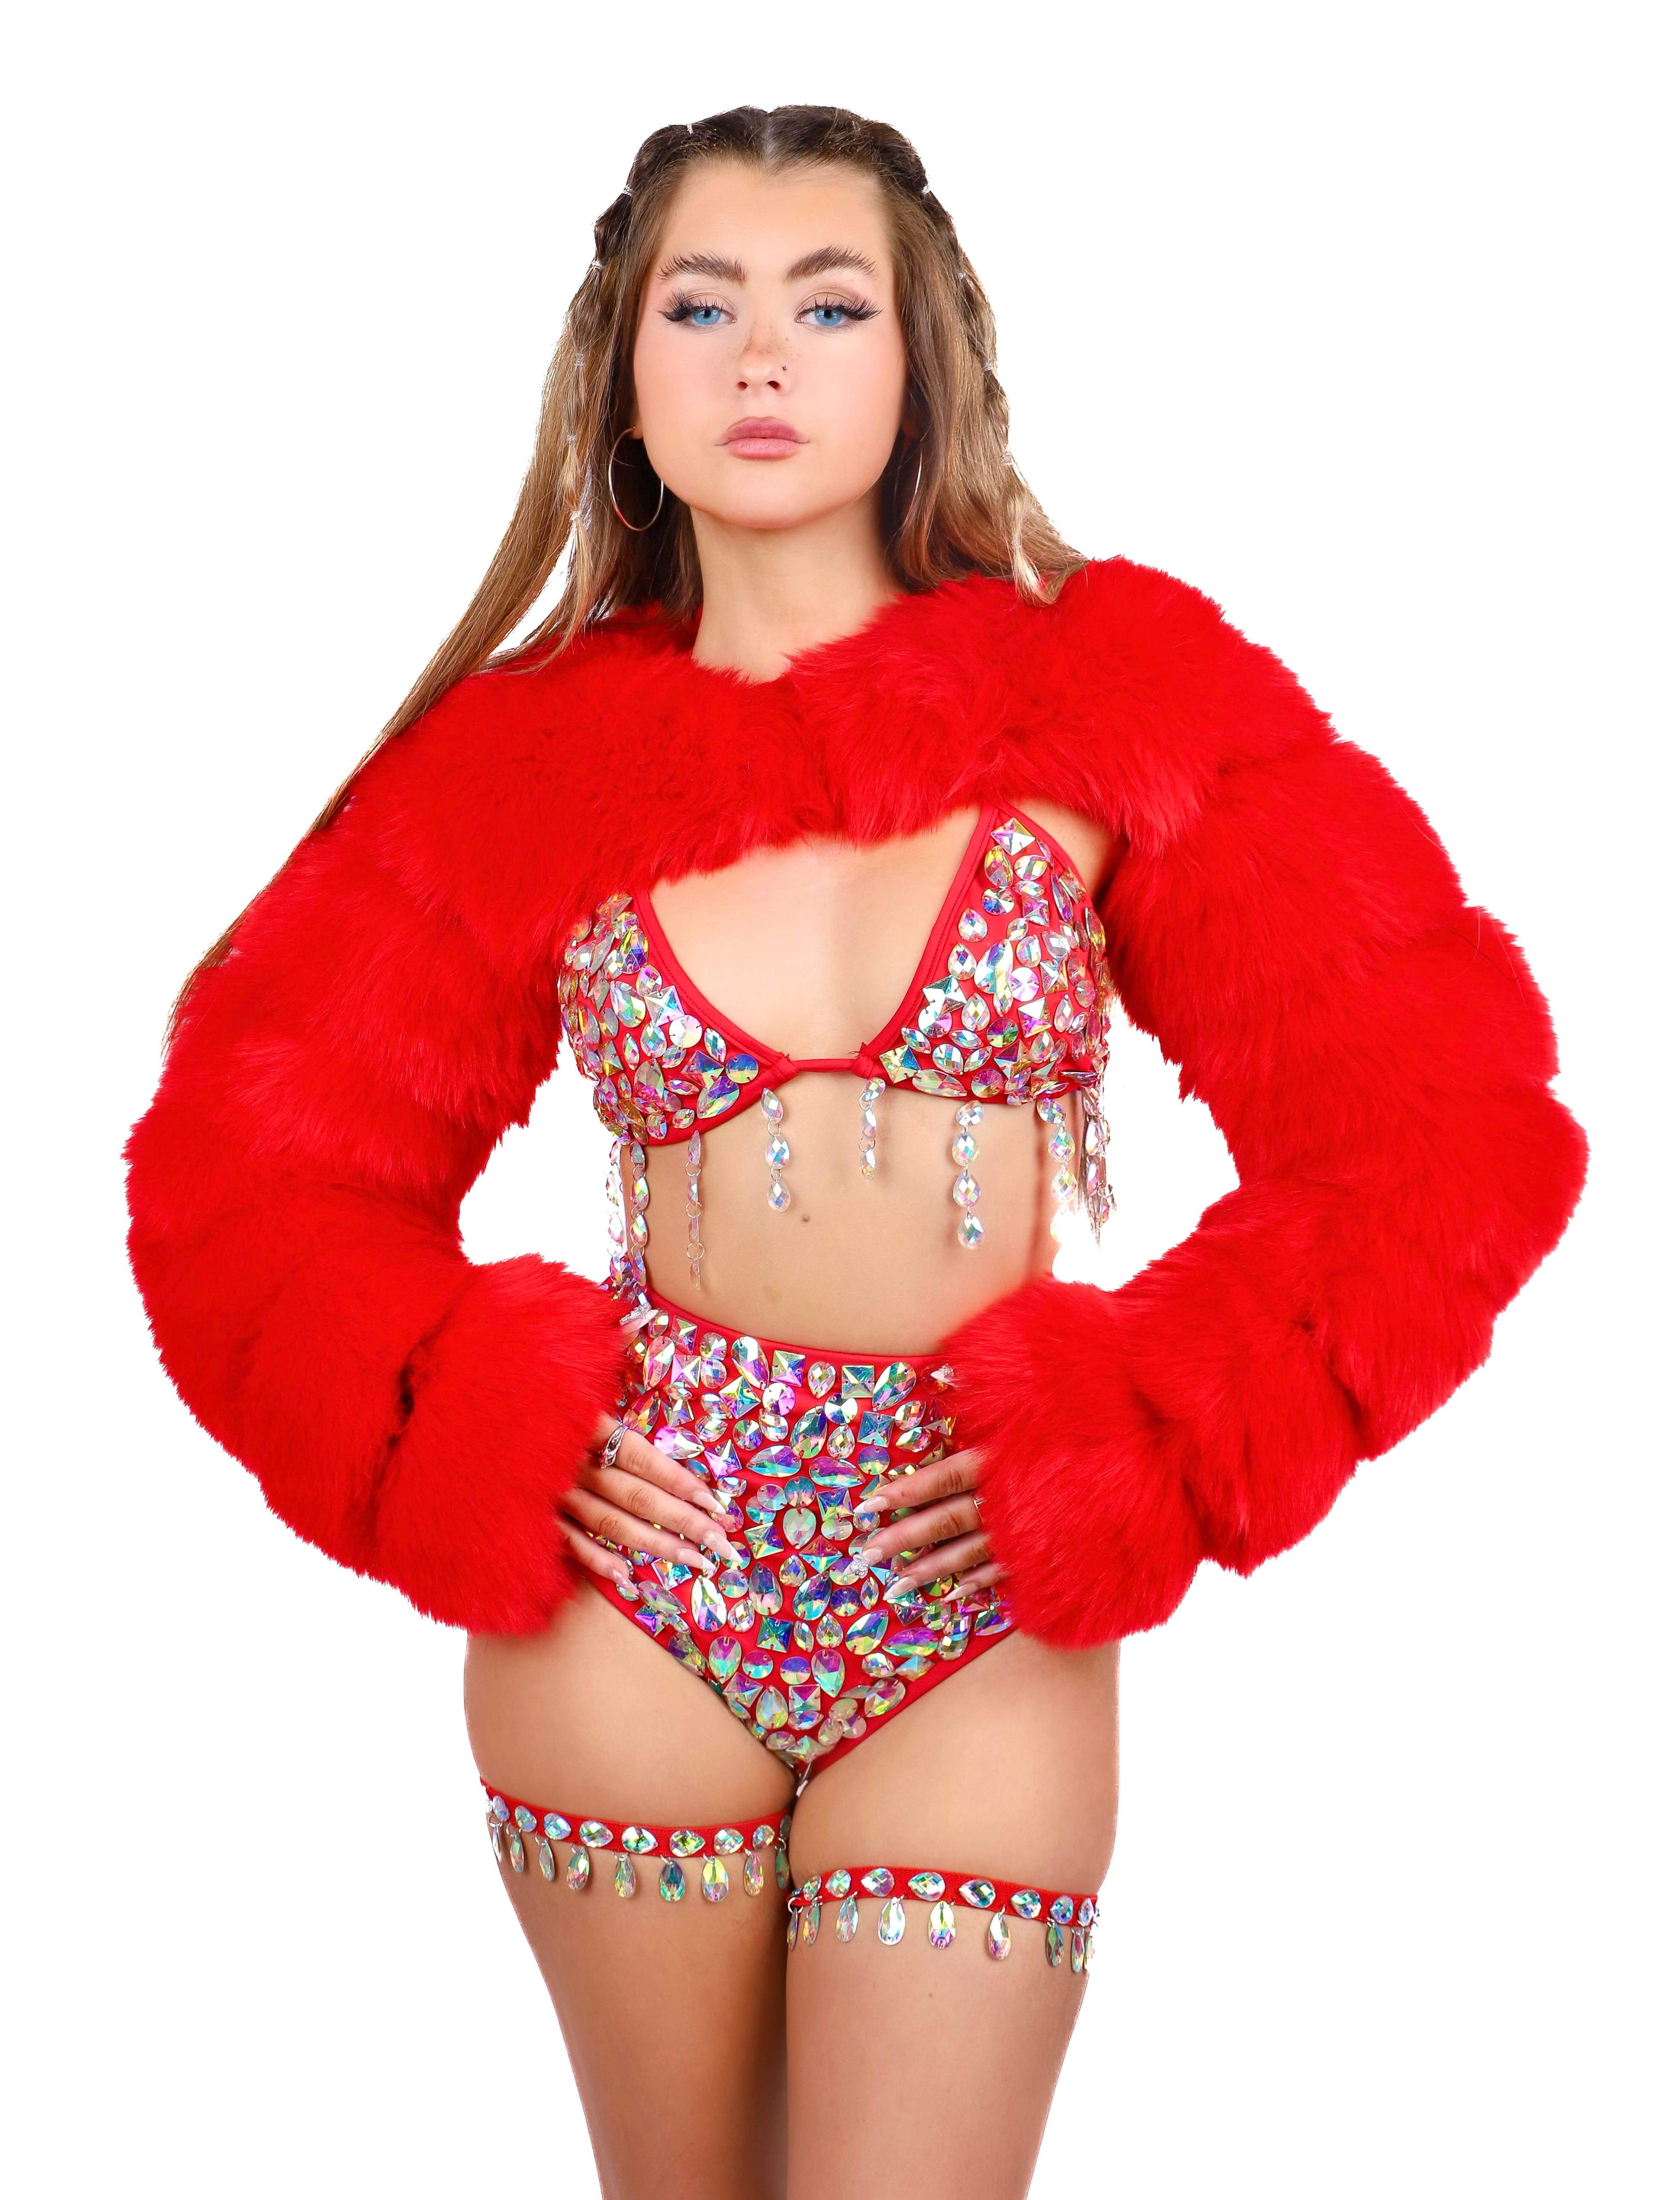 FULL OUTFIT- Fuzzy Ruby (4 pcs)